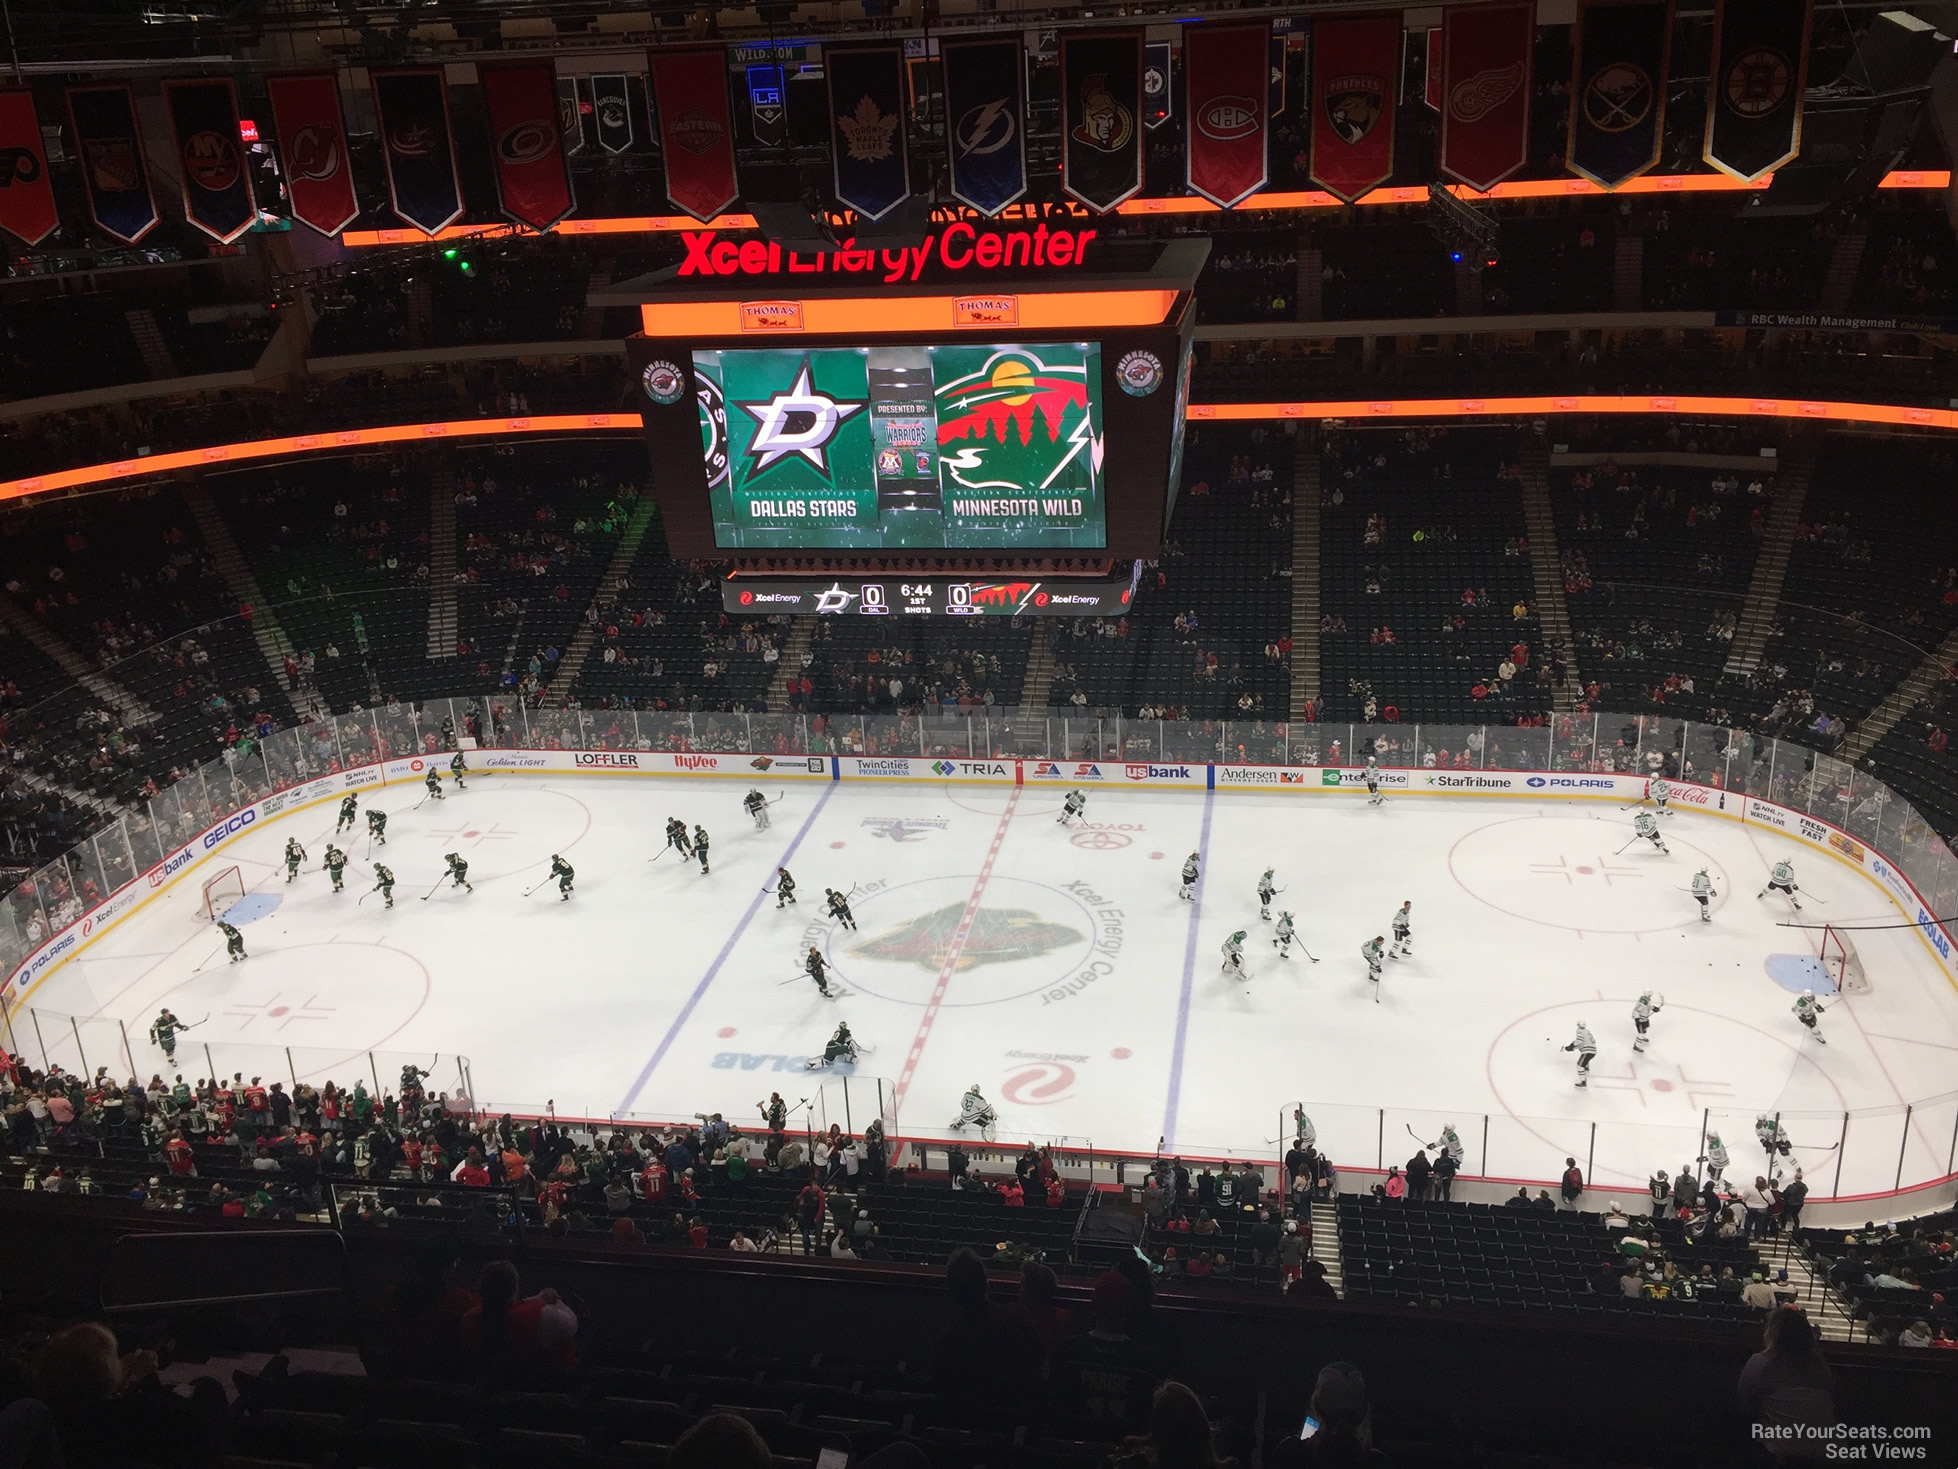 section 218, row 6 seat view  for hockey - xcel energy center